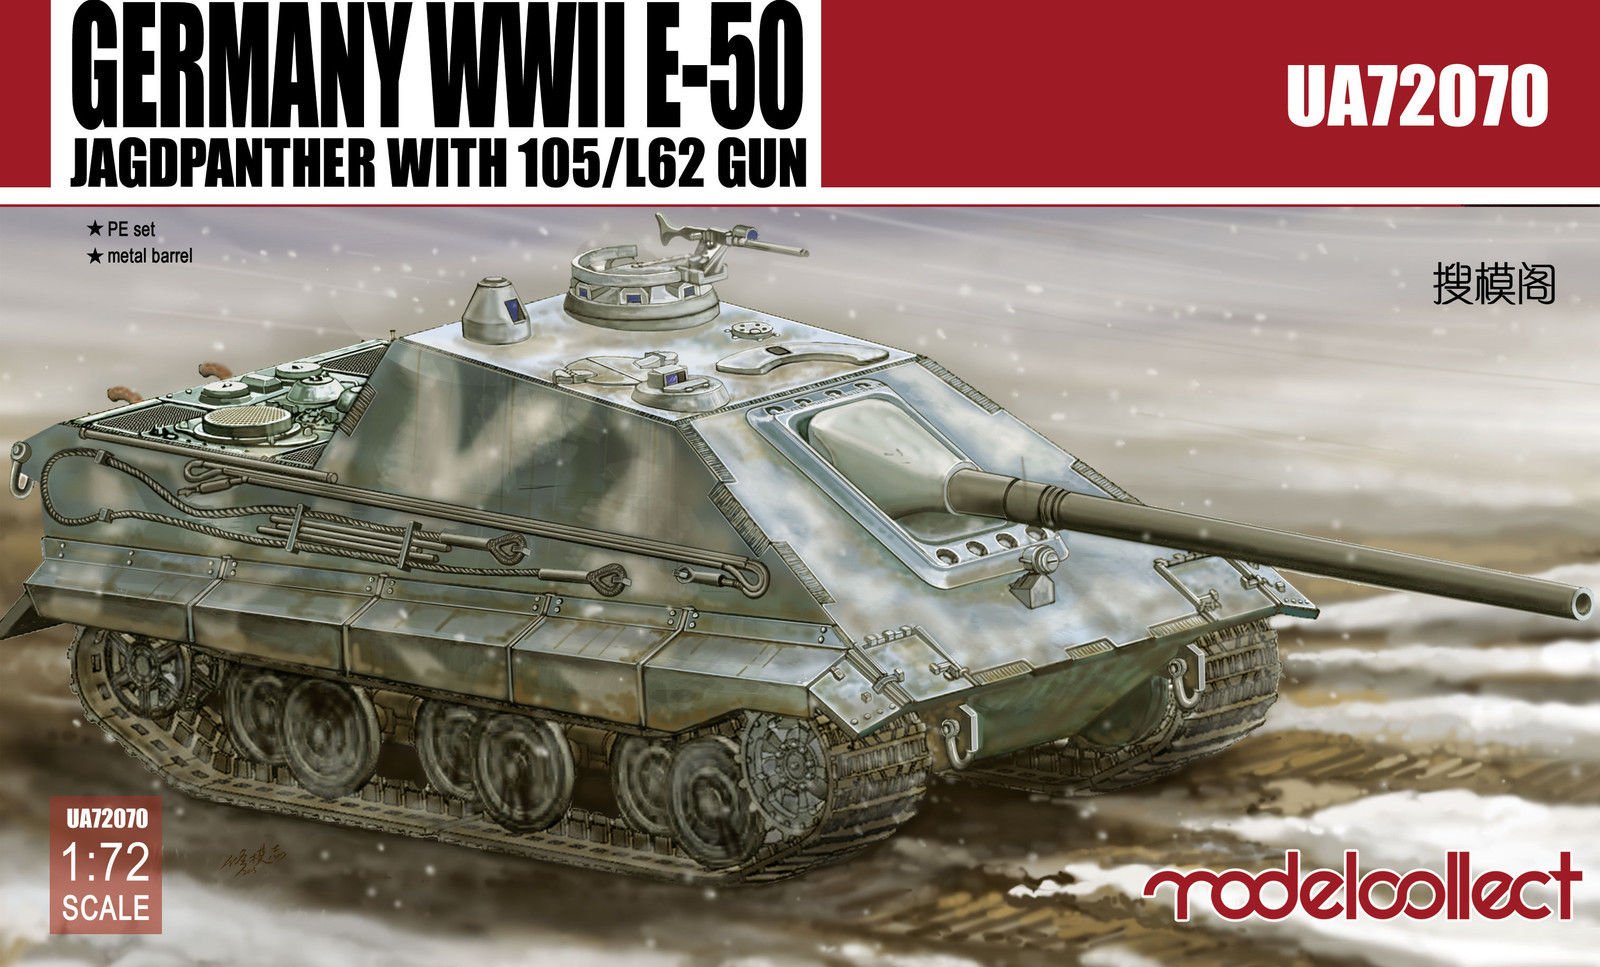 1/72 WWII German E-50 StuG with 105mm L/62 Gun - Click Image to Close